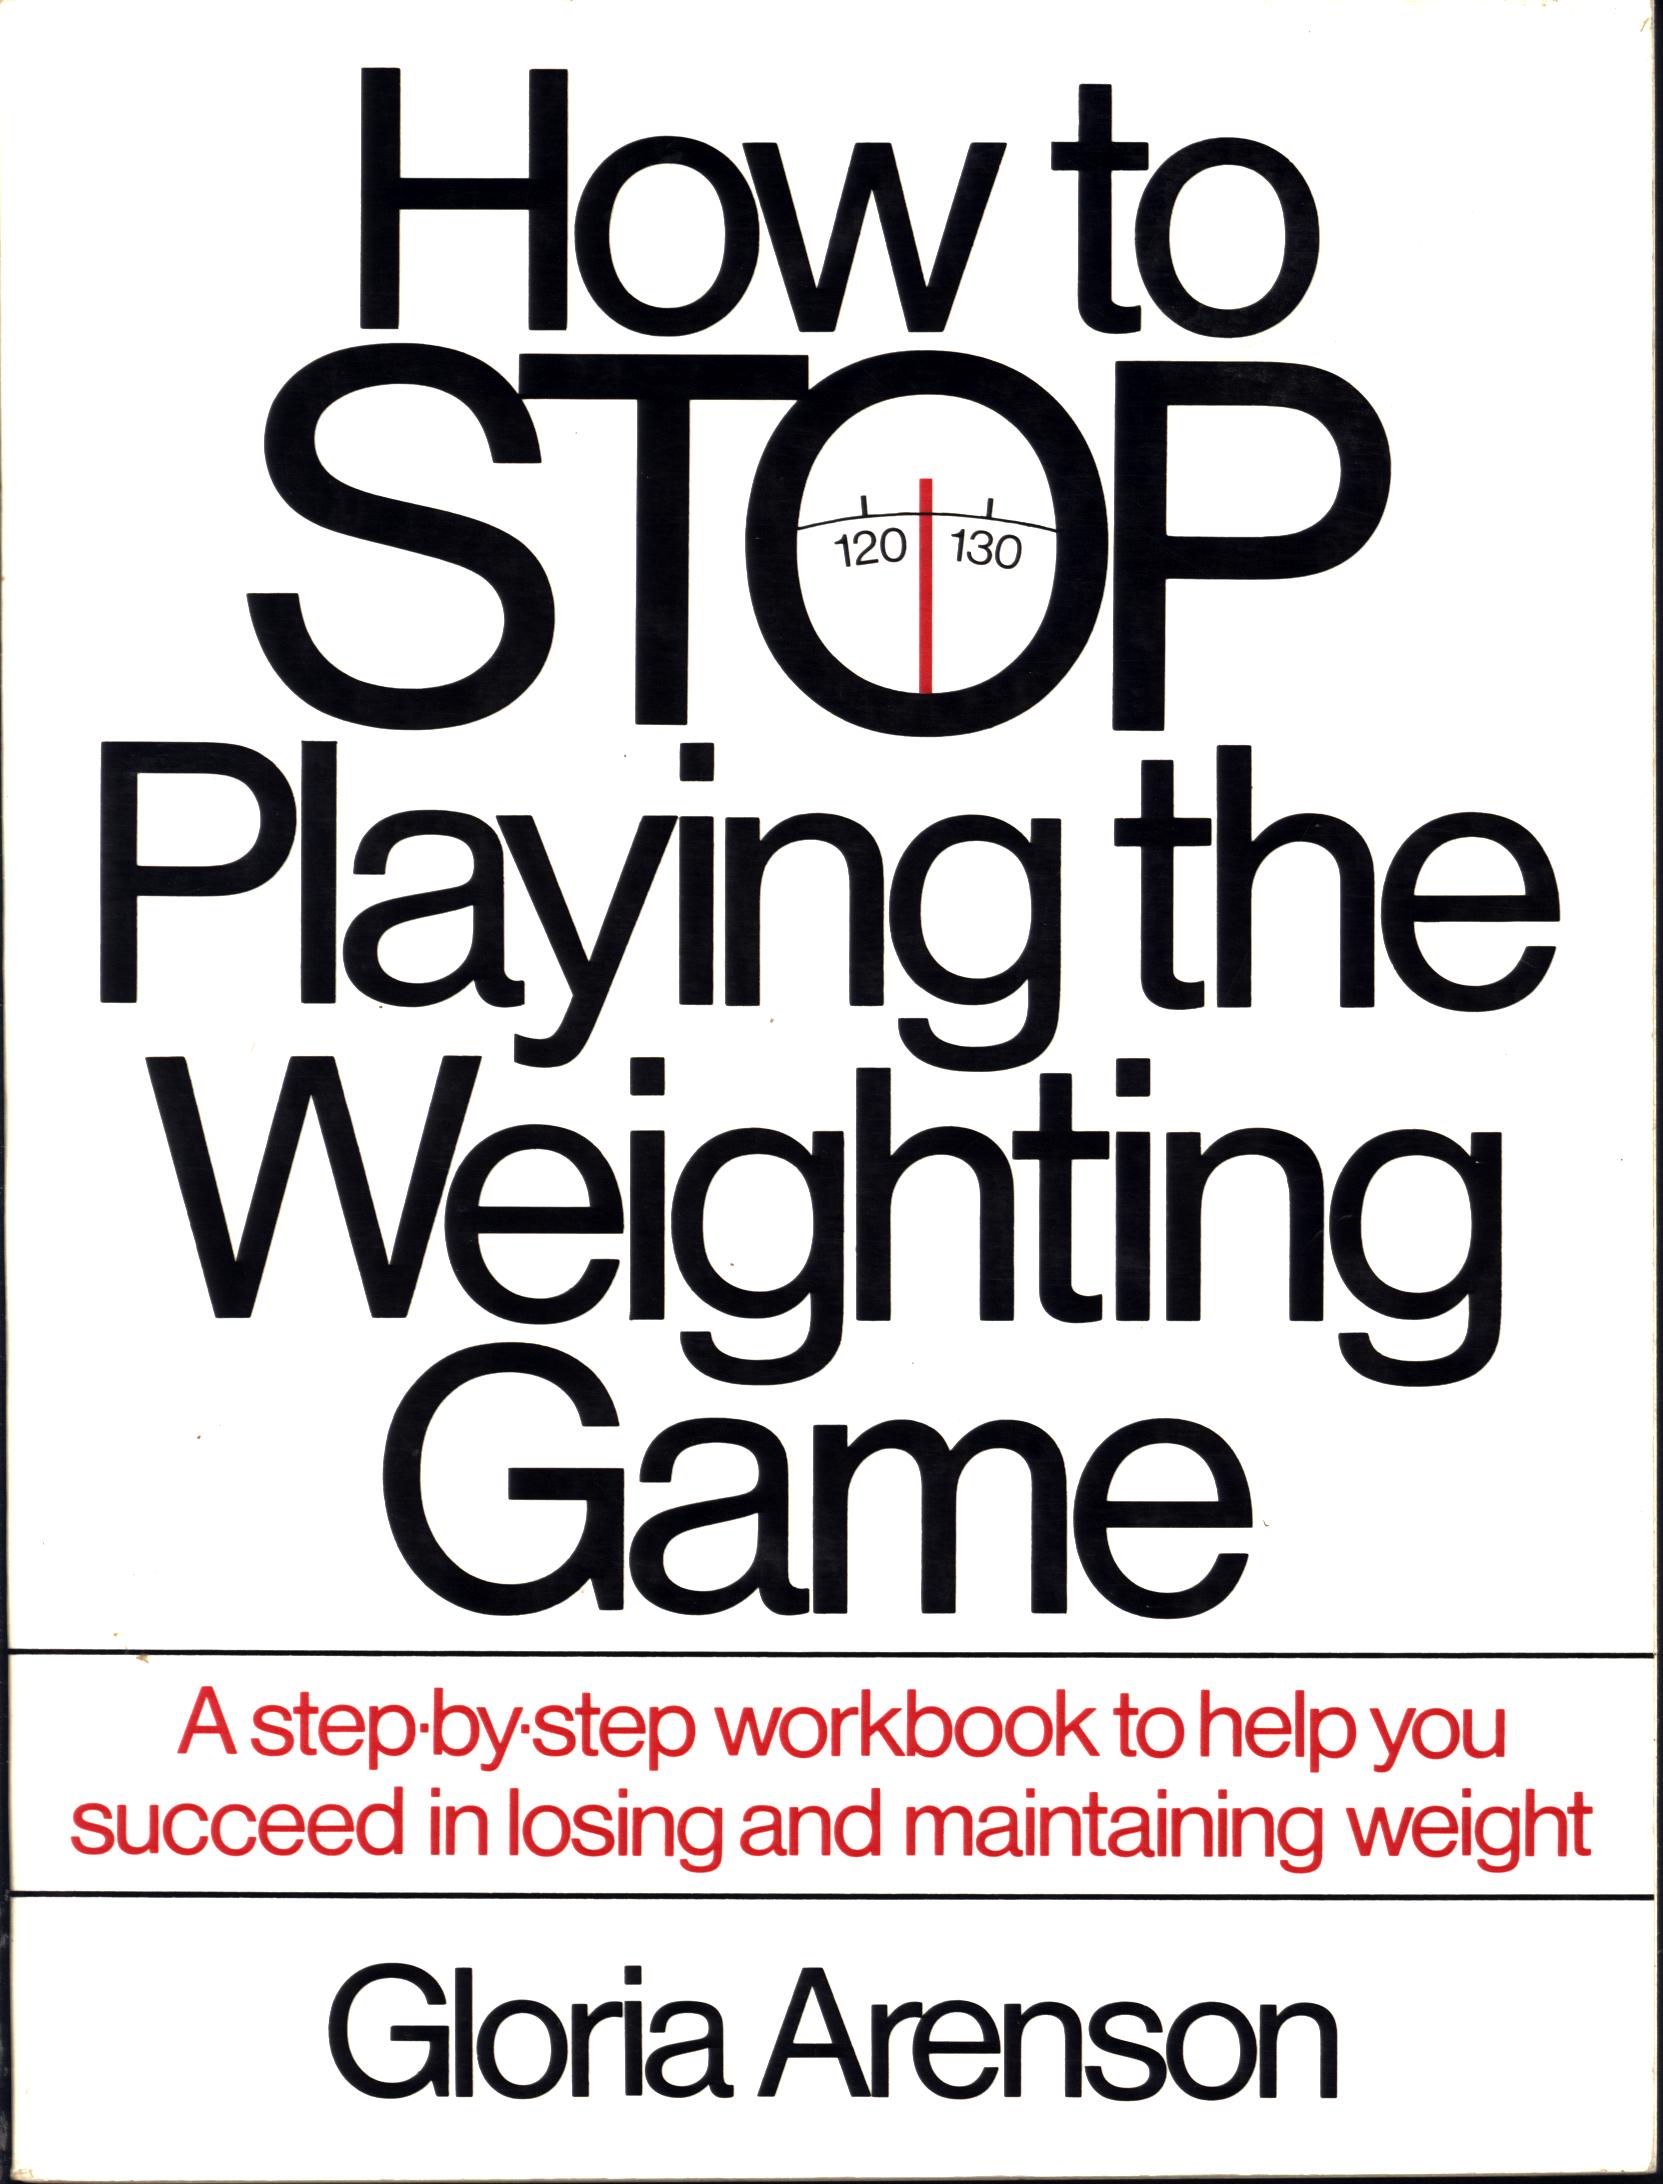 HOW TO STOP PLAYING THE WEIGHTING GAME. 